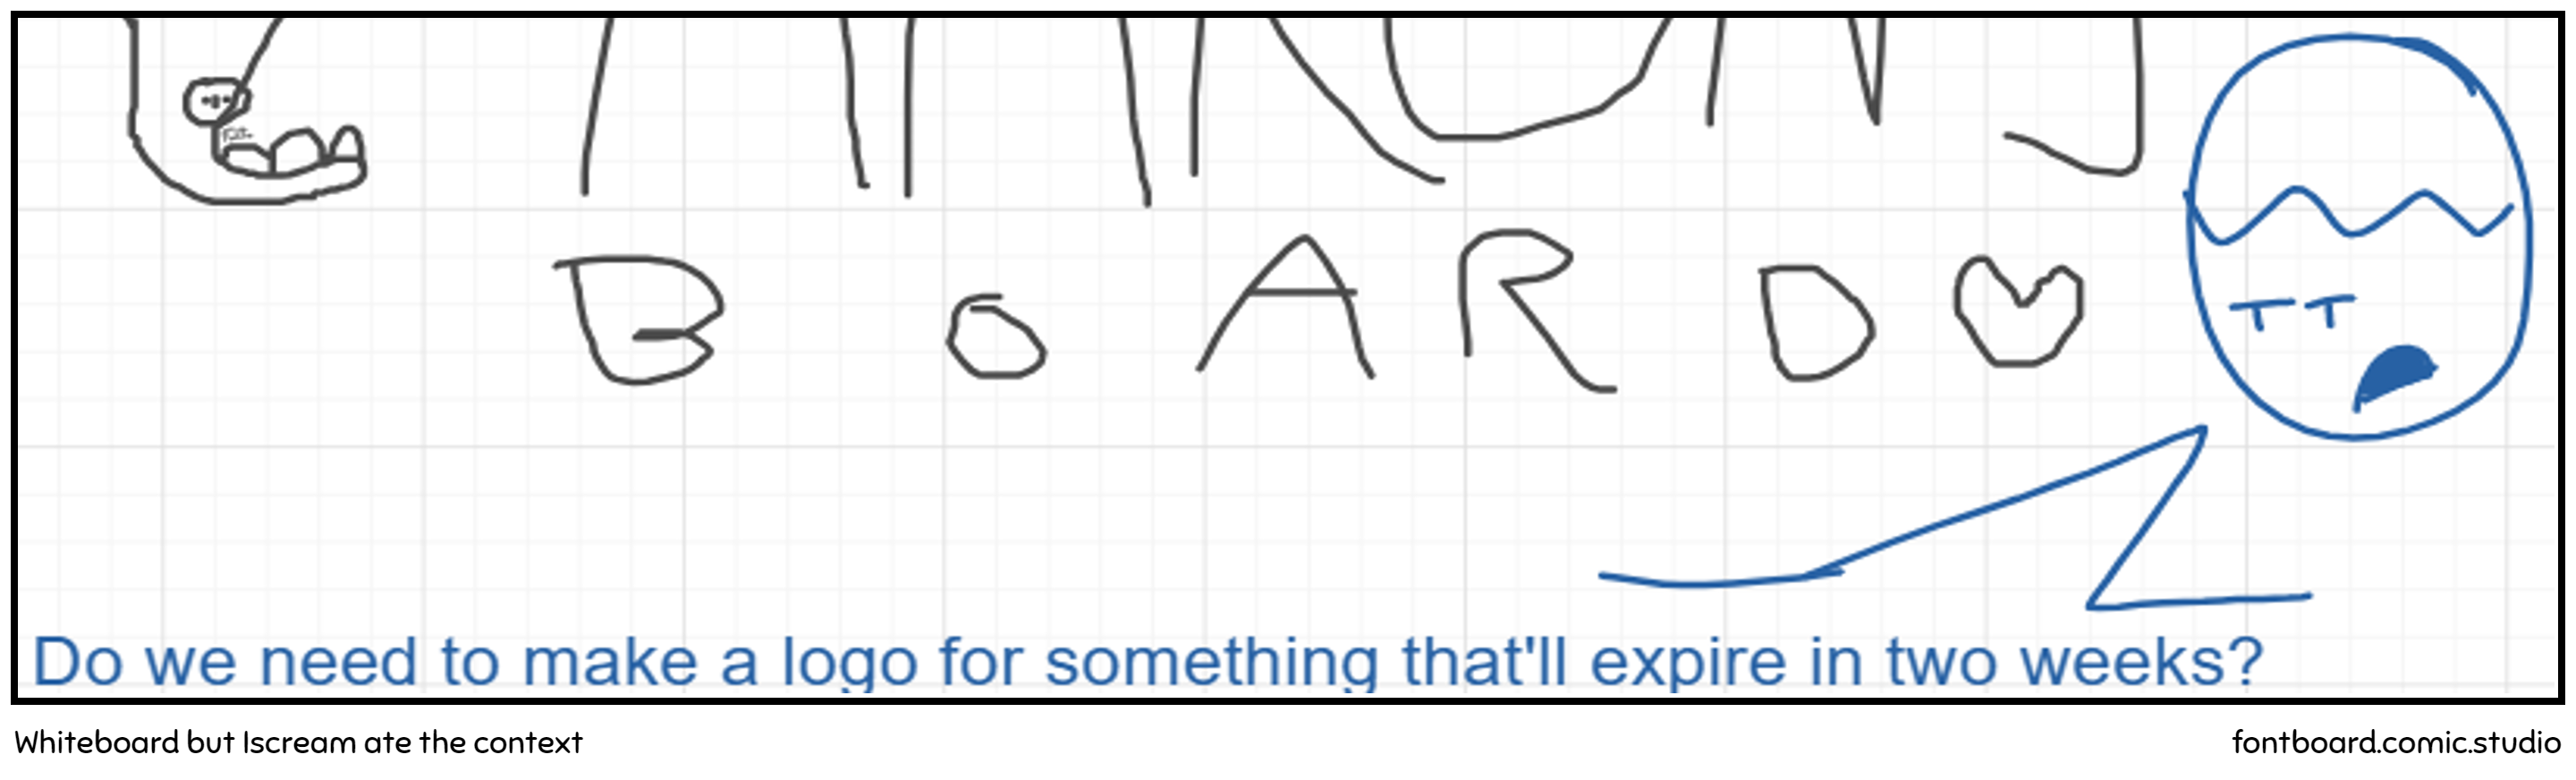 Whiteboard but Iscream ate the context